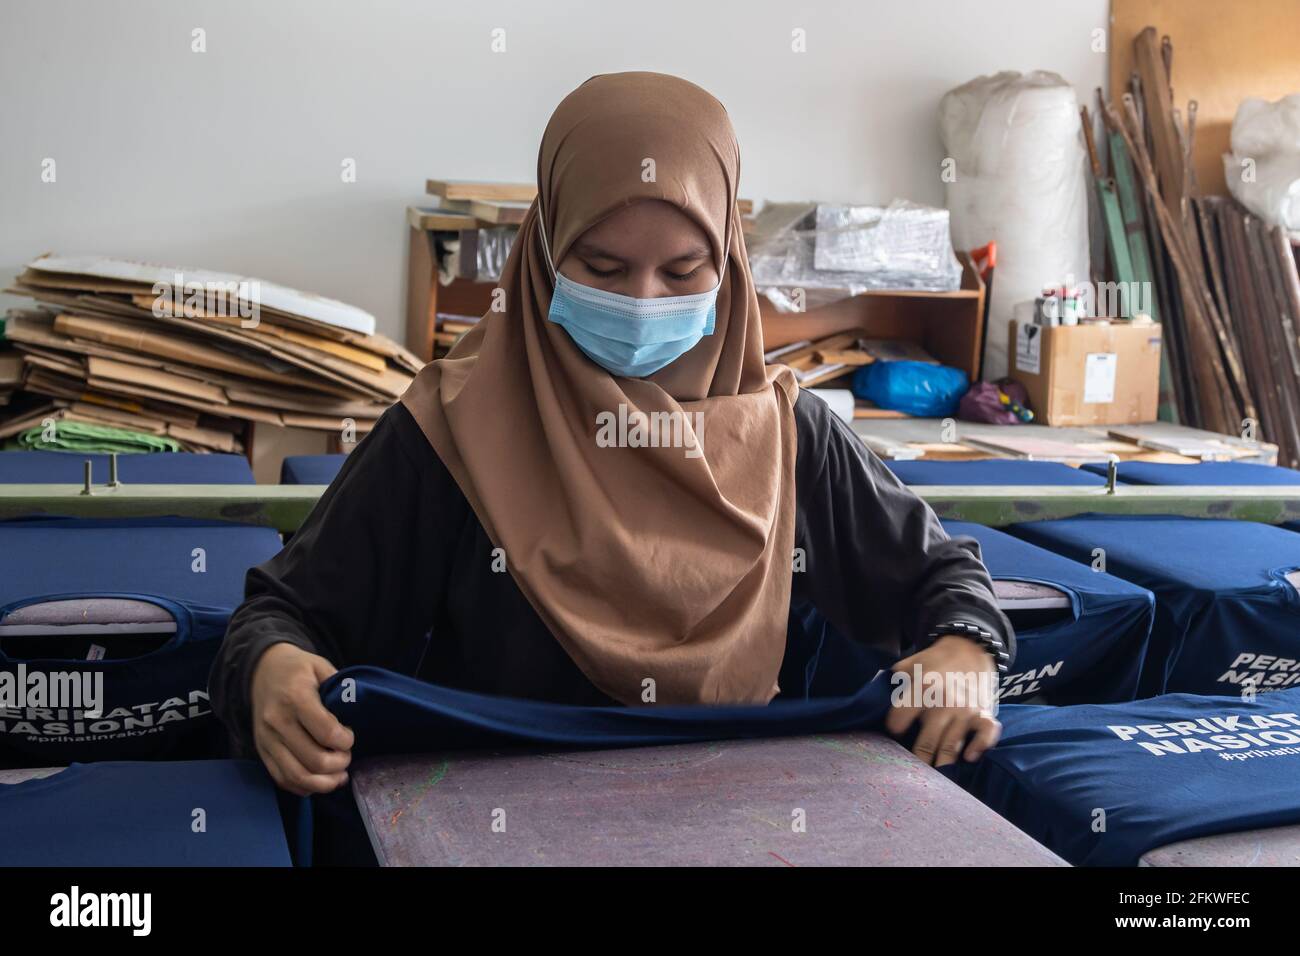 Kota Kinabalu, Sabah, Malaysia-March 05, 2021 : Lady worker with medical face mask preparing t-shirt for printing in the silk screen printing table oa Stock Photo